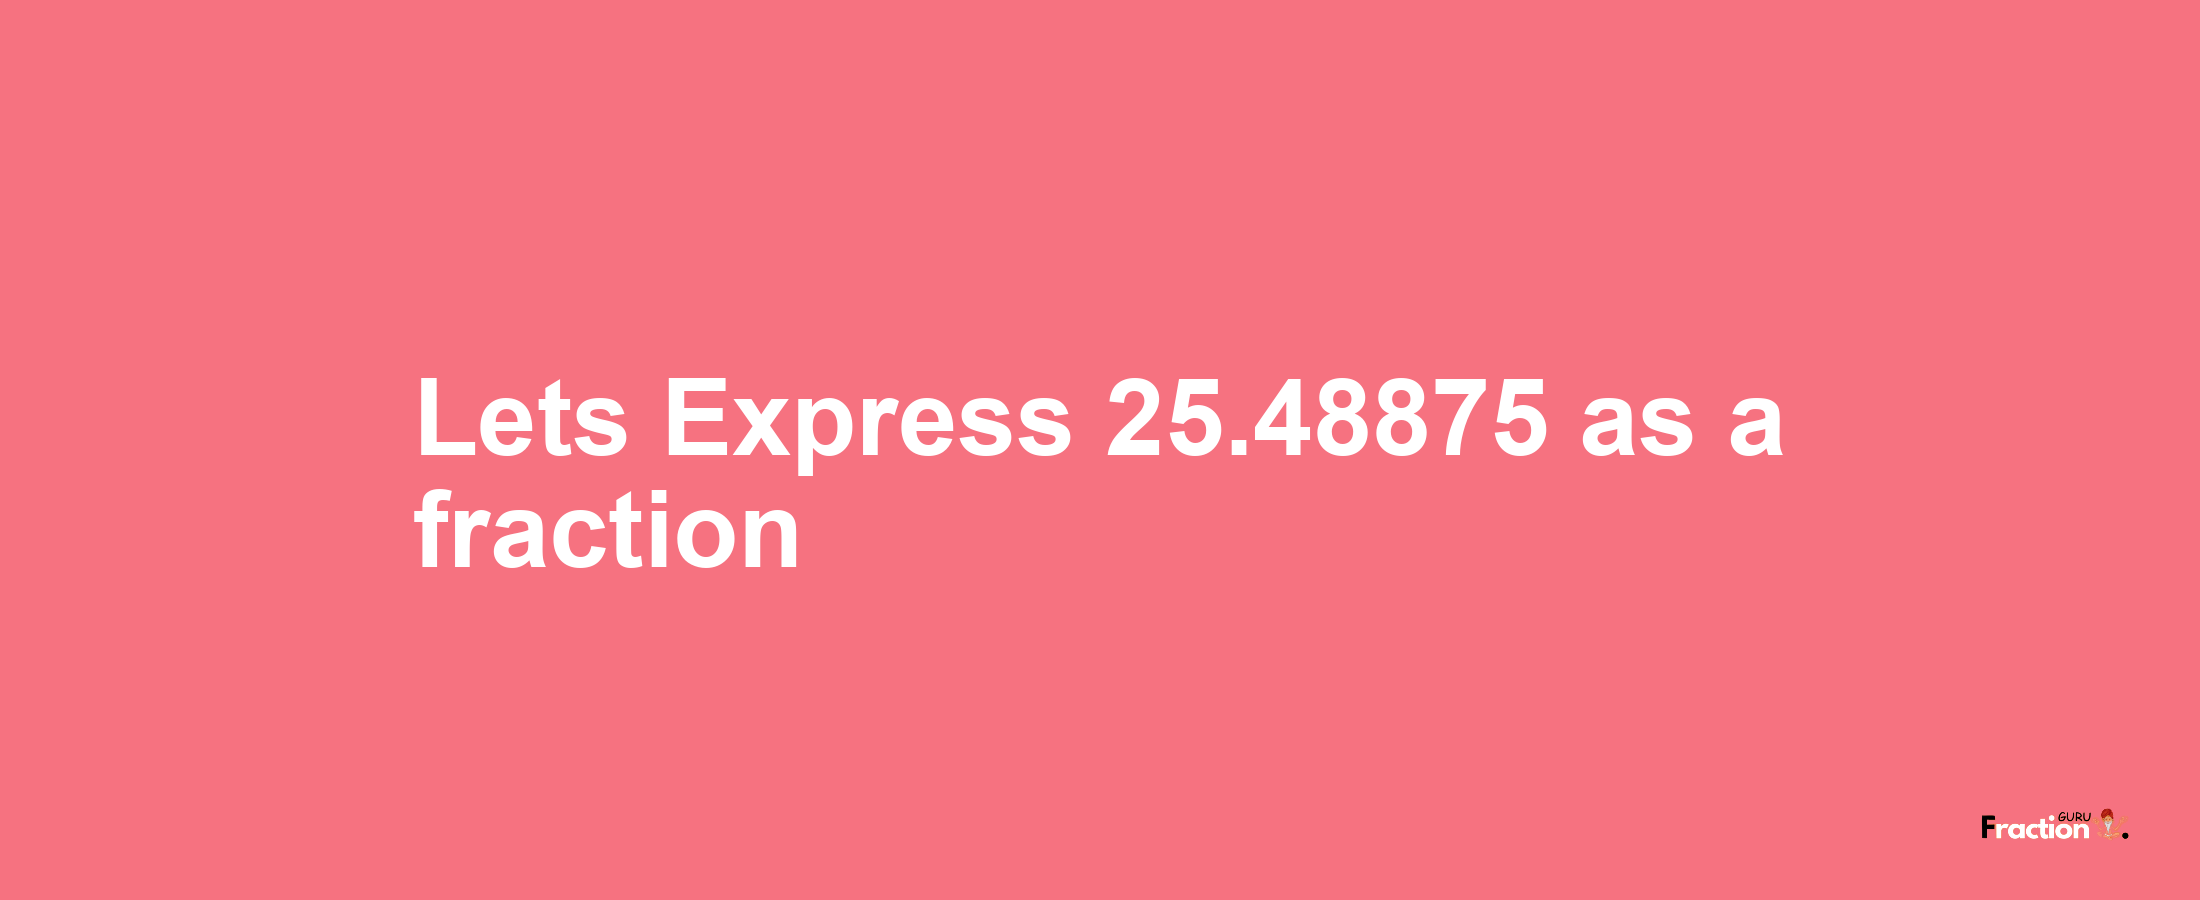 Lets Express 25.48875 as afraction